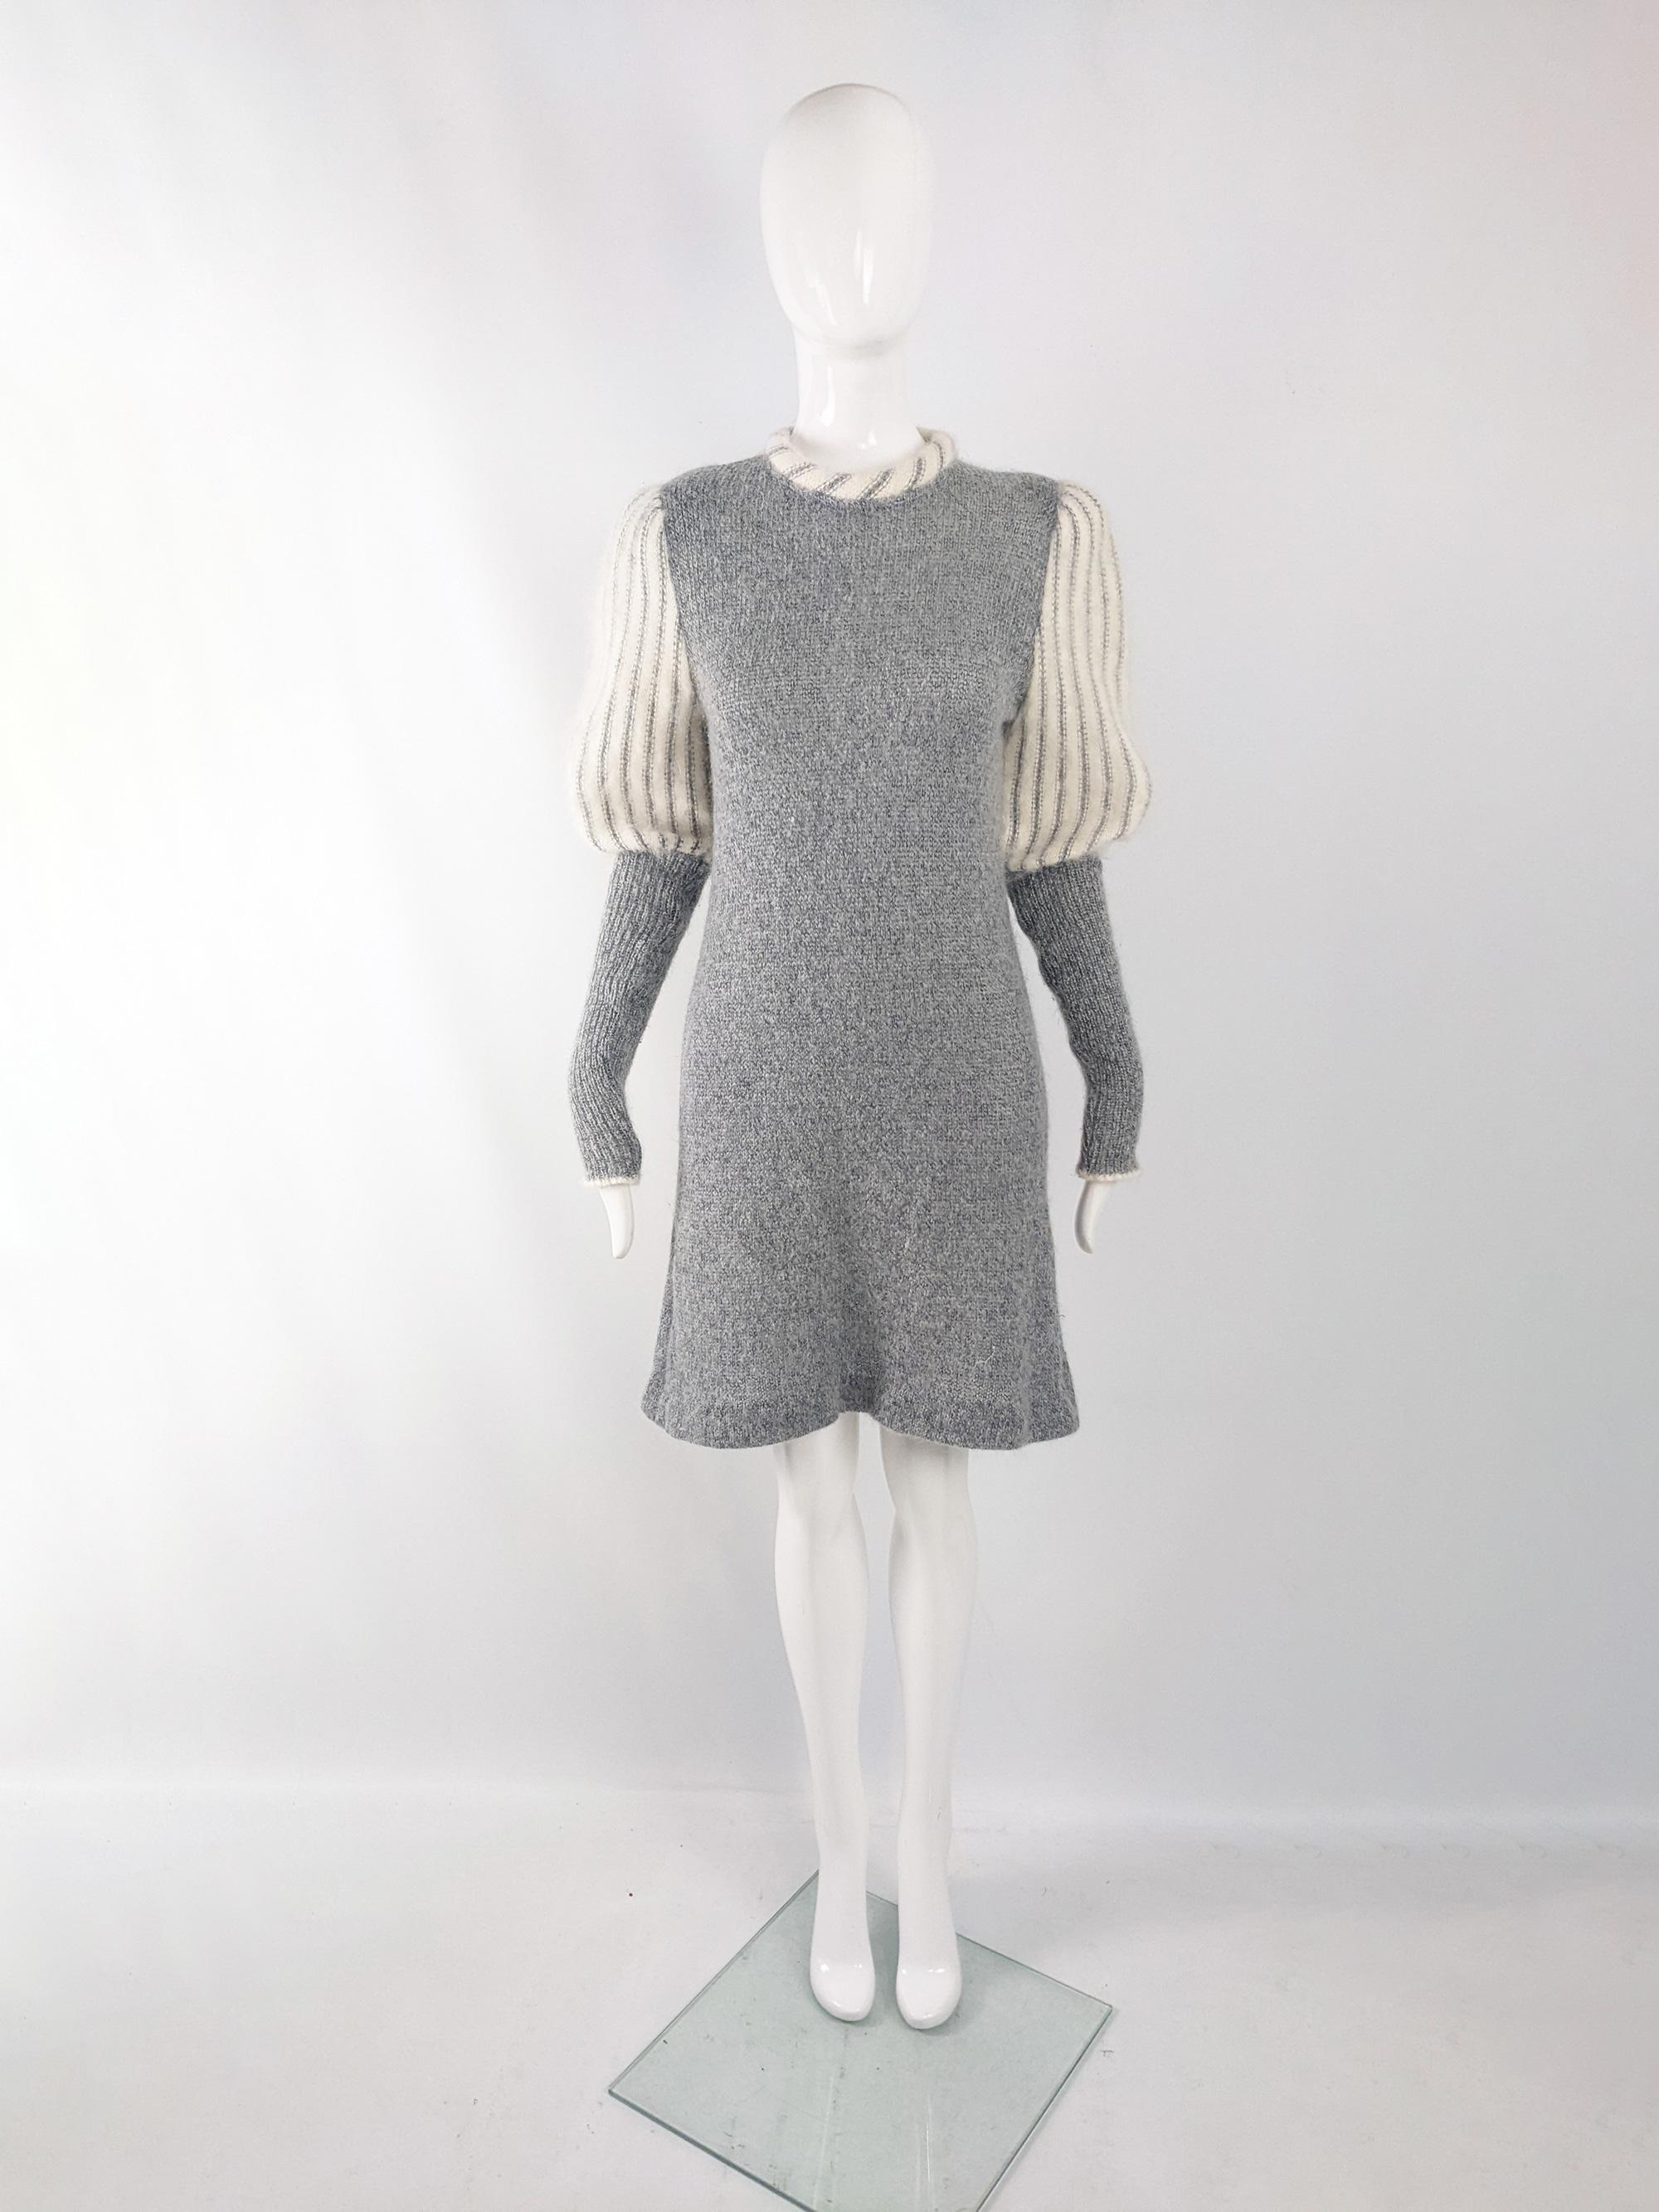 An incredible vintage womens knit dress from the late 70s / early 80s by luxury French fashion house, Carven. In a grey wool knit fabric with long sleeves and a fluffy cream mohair puffed design, giving a historical nod. It has a padded neckline, a